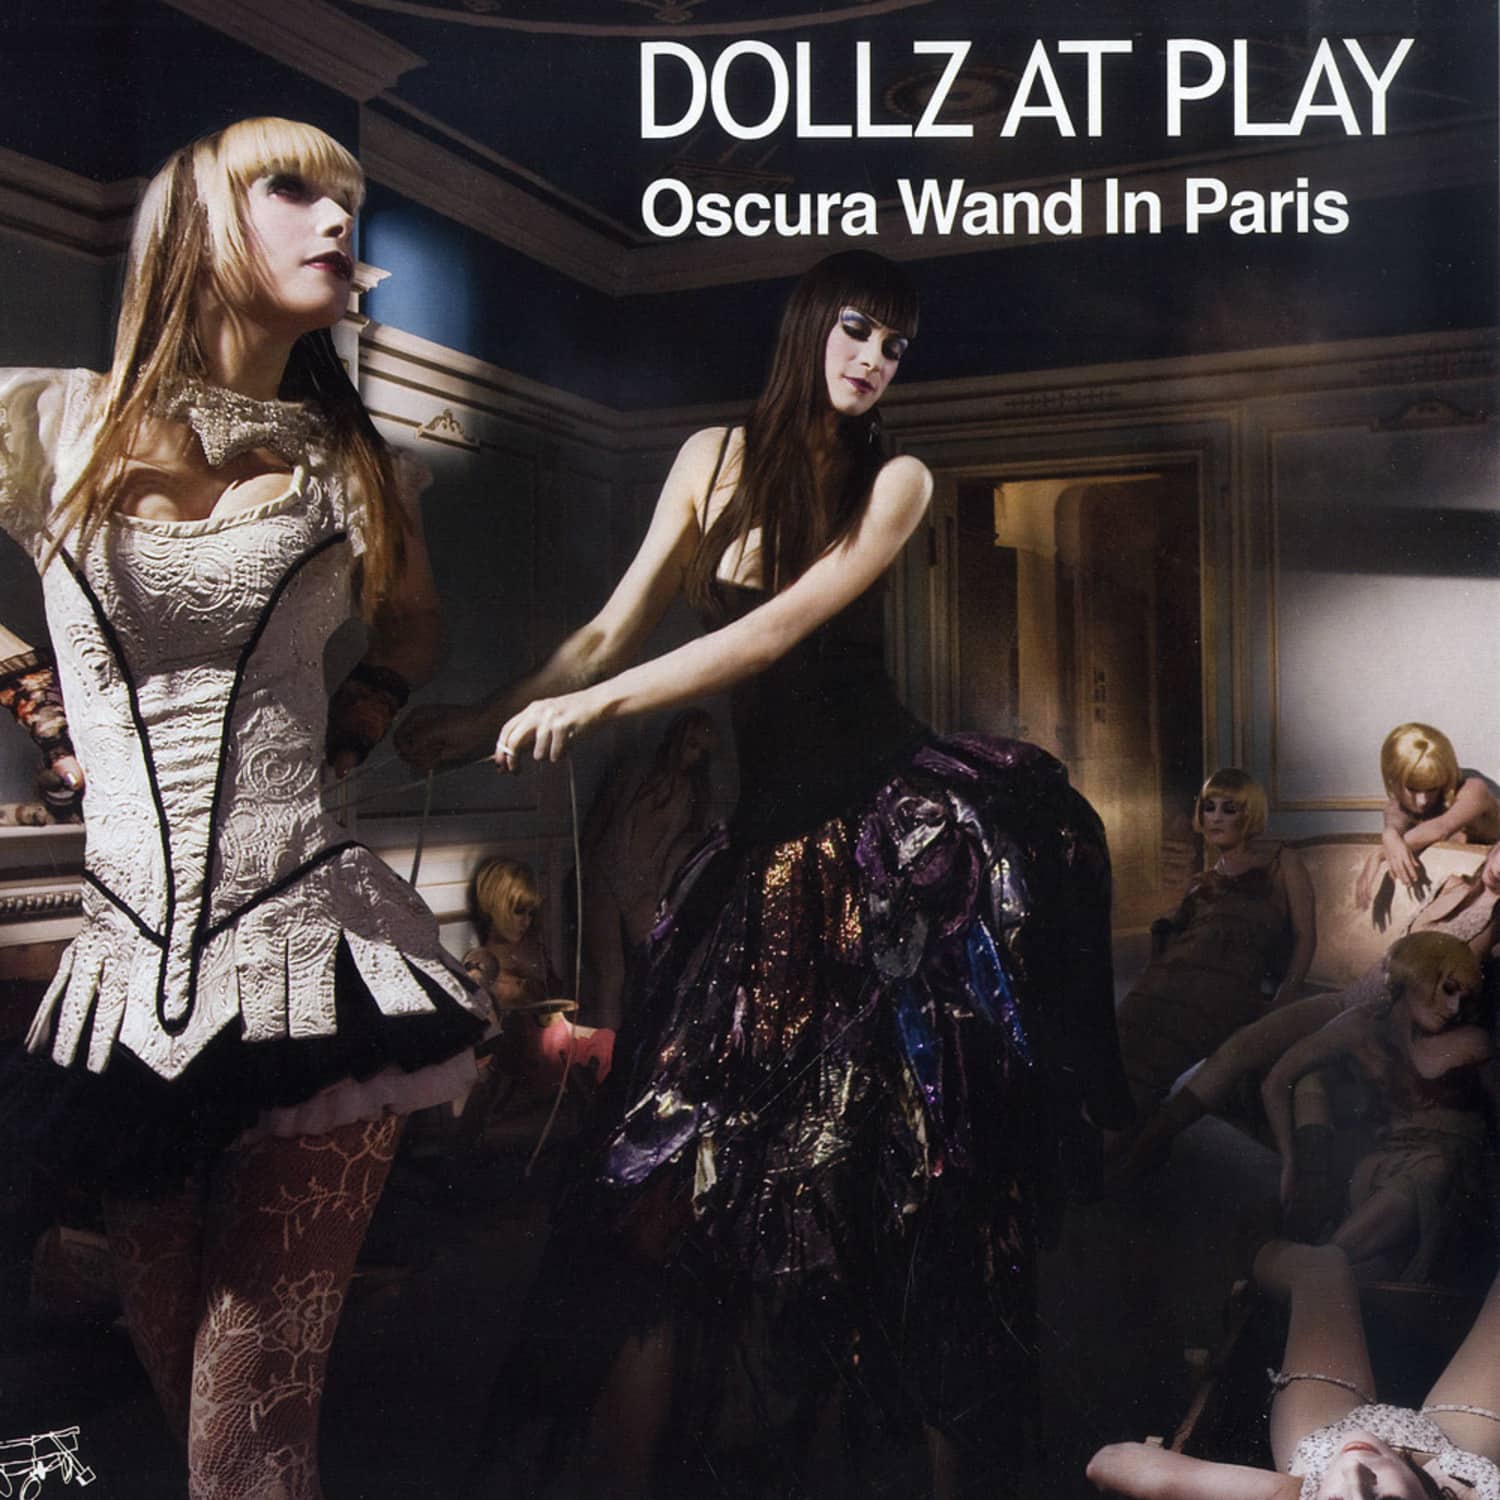 Dollz At Play - OSCURA WAND IN PARIS EP